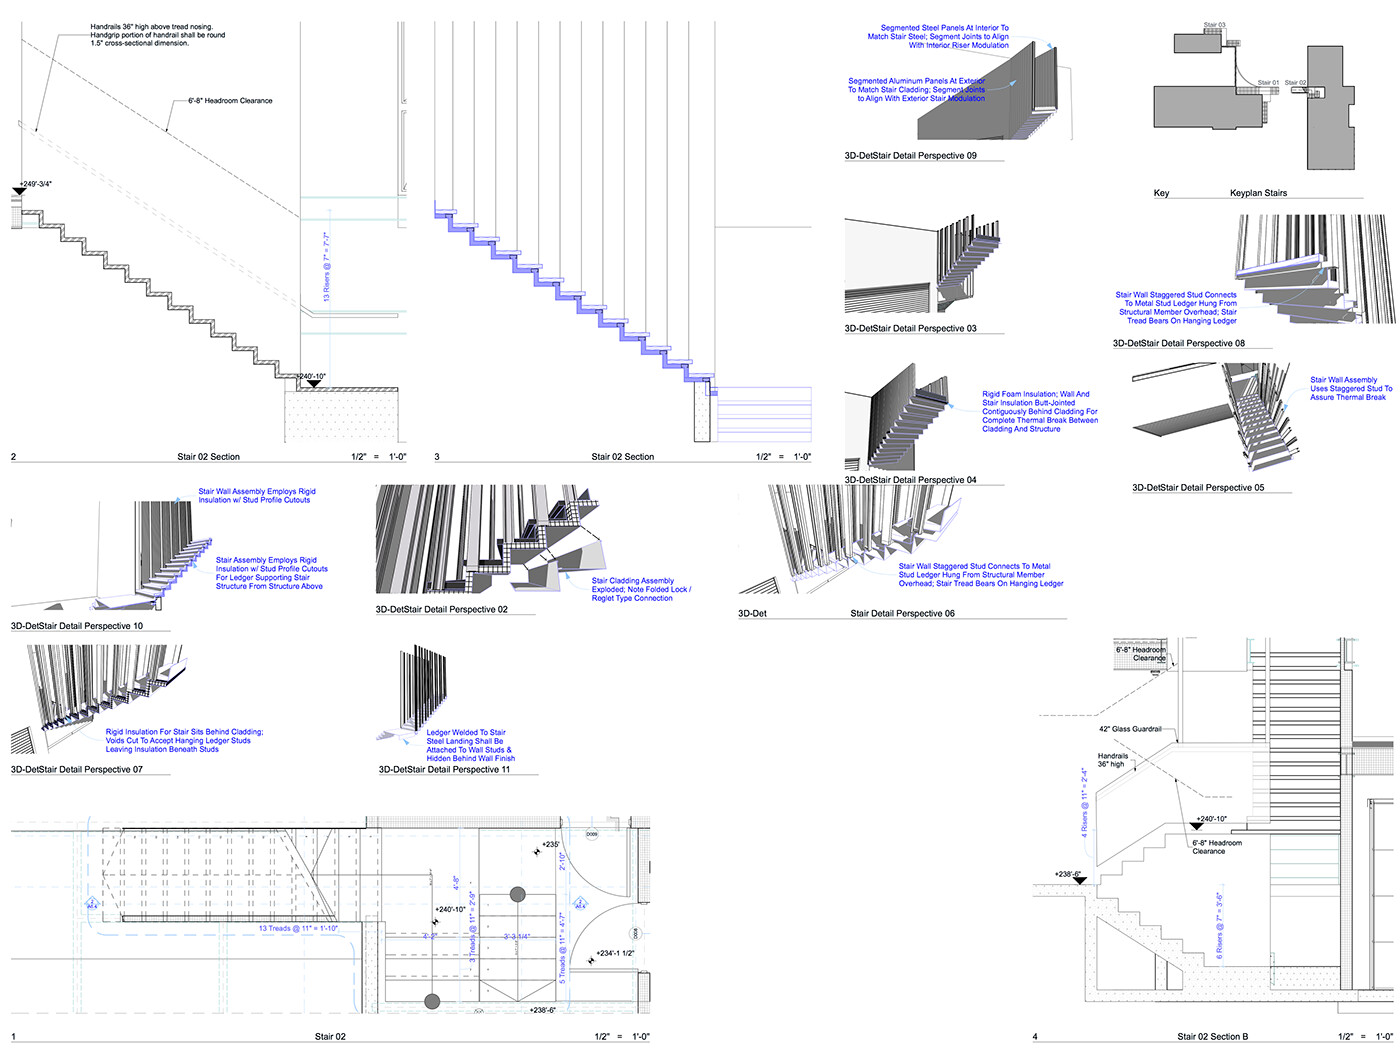 Here we see perspectives, perspective sections, 2D sections and plans all in one sheet: this should decrease any chances of error or misunderstanding.